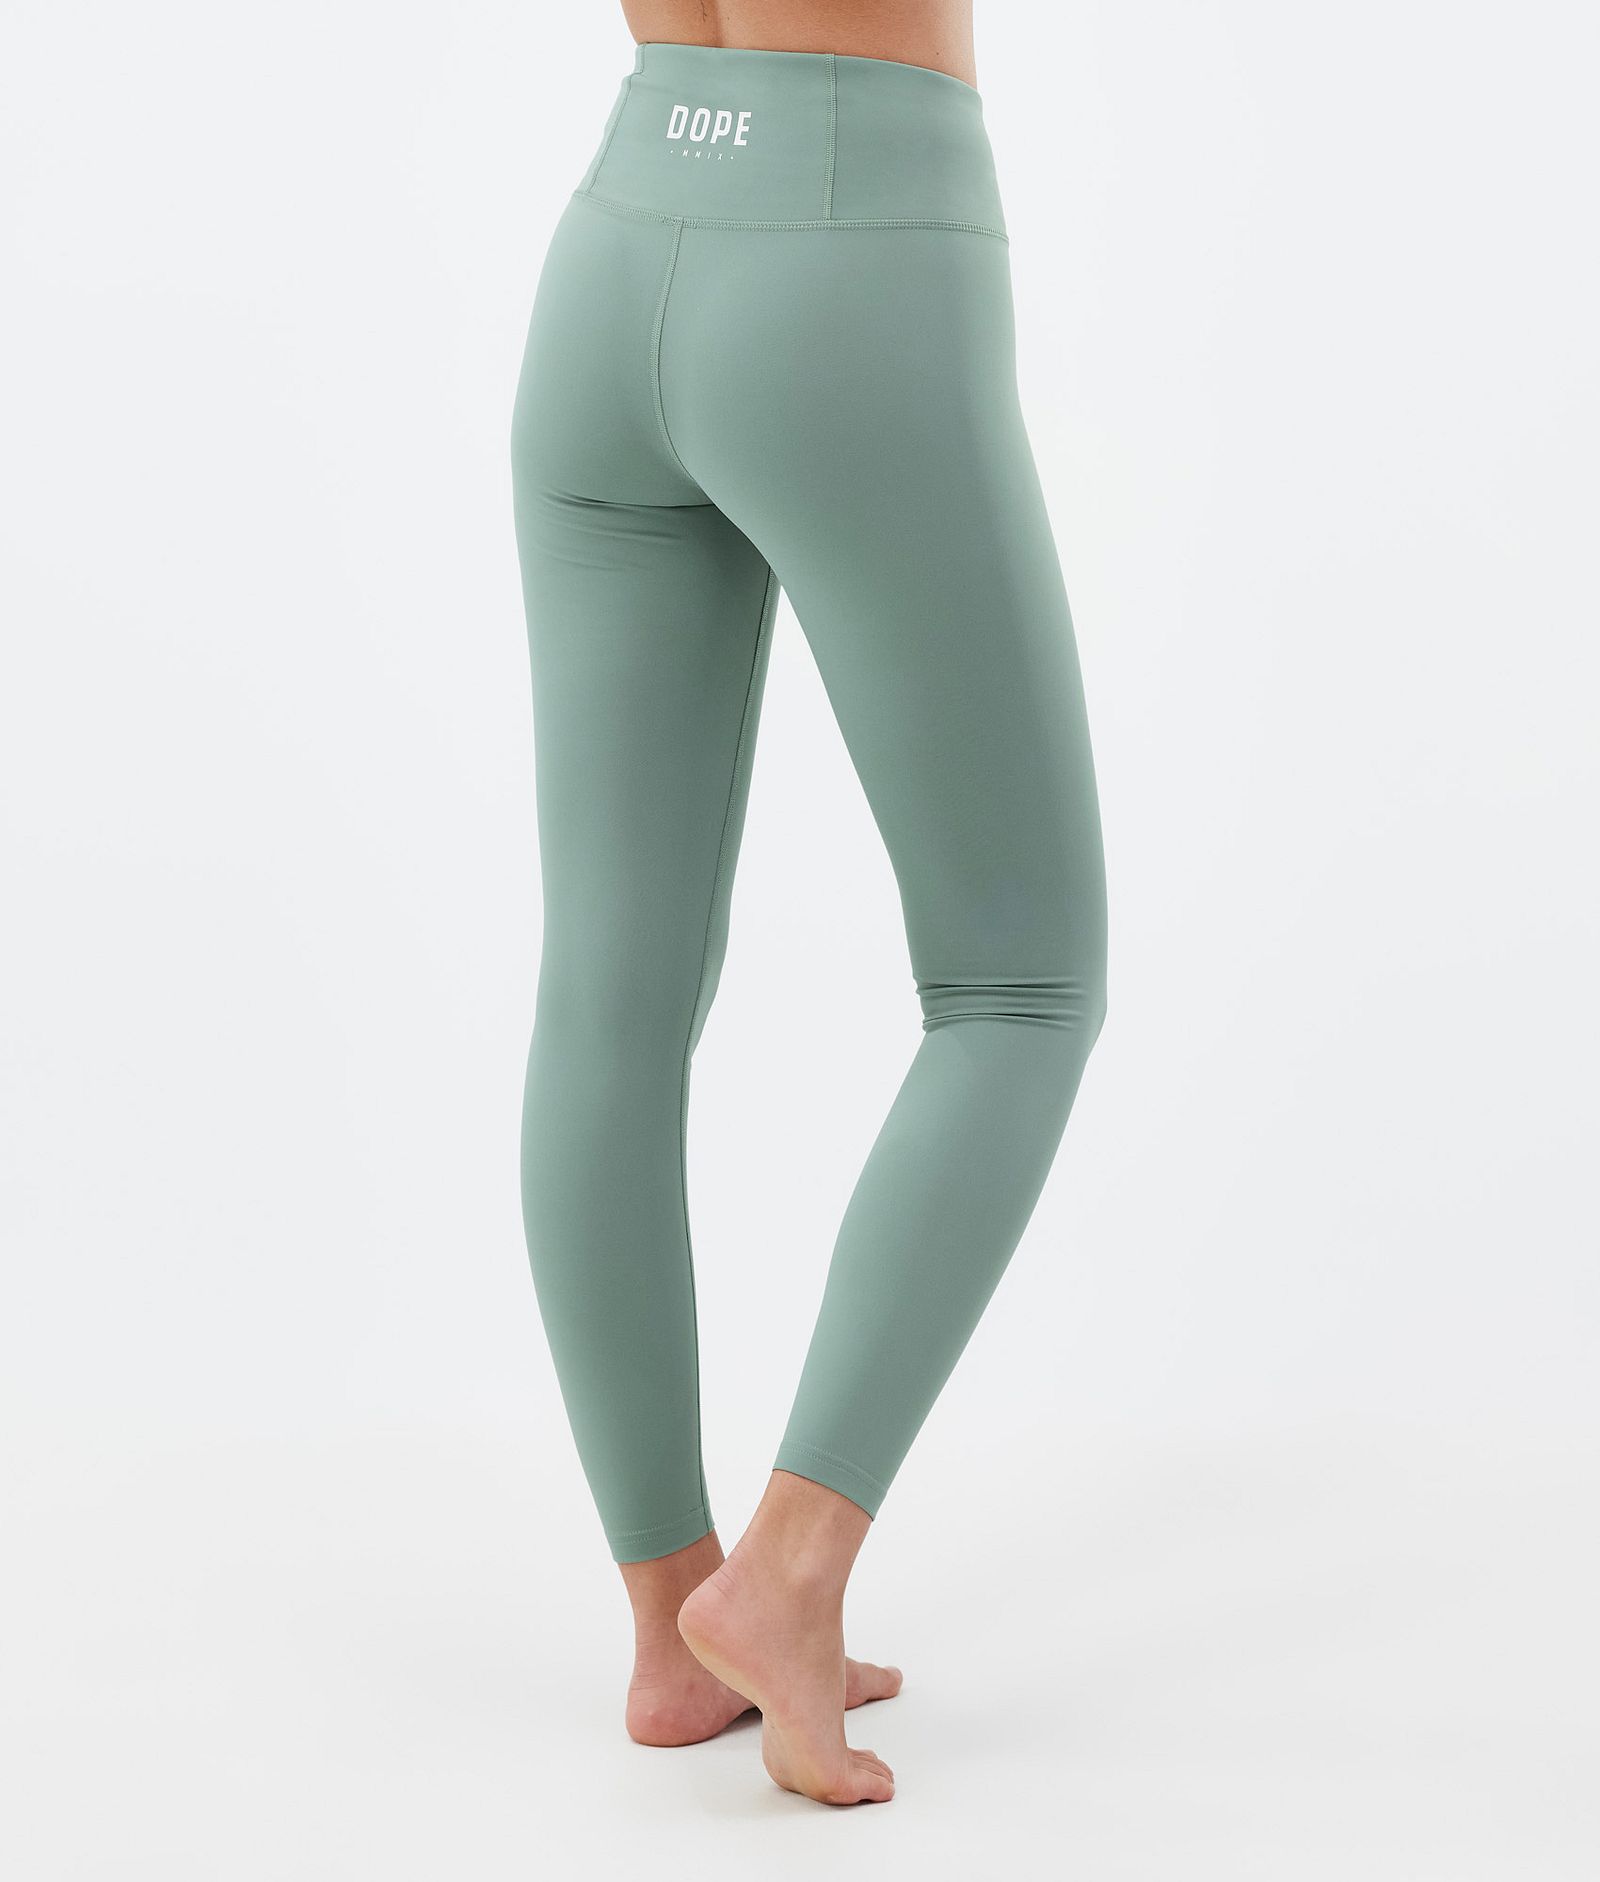 Snuggle W Pantalon thermique Femme 2X-Up Faded Green